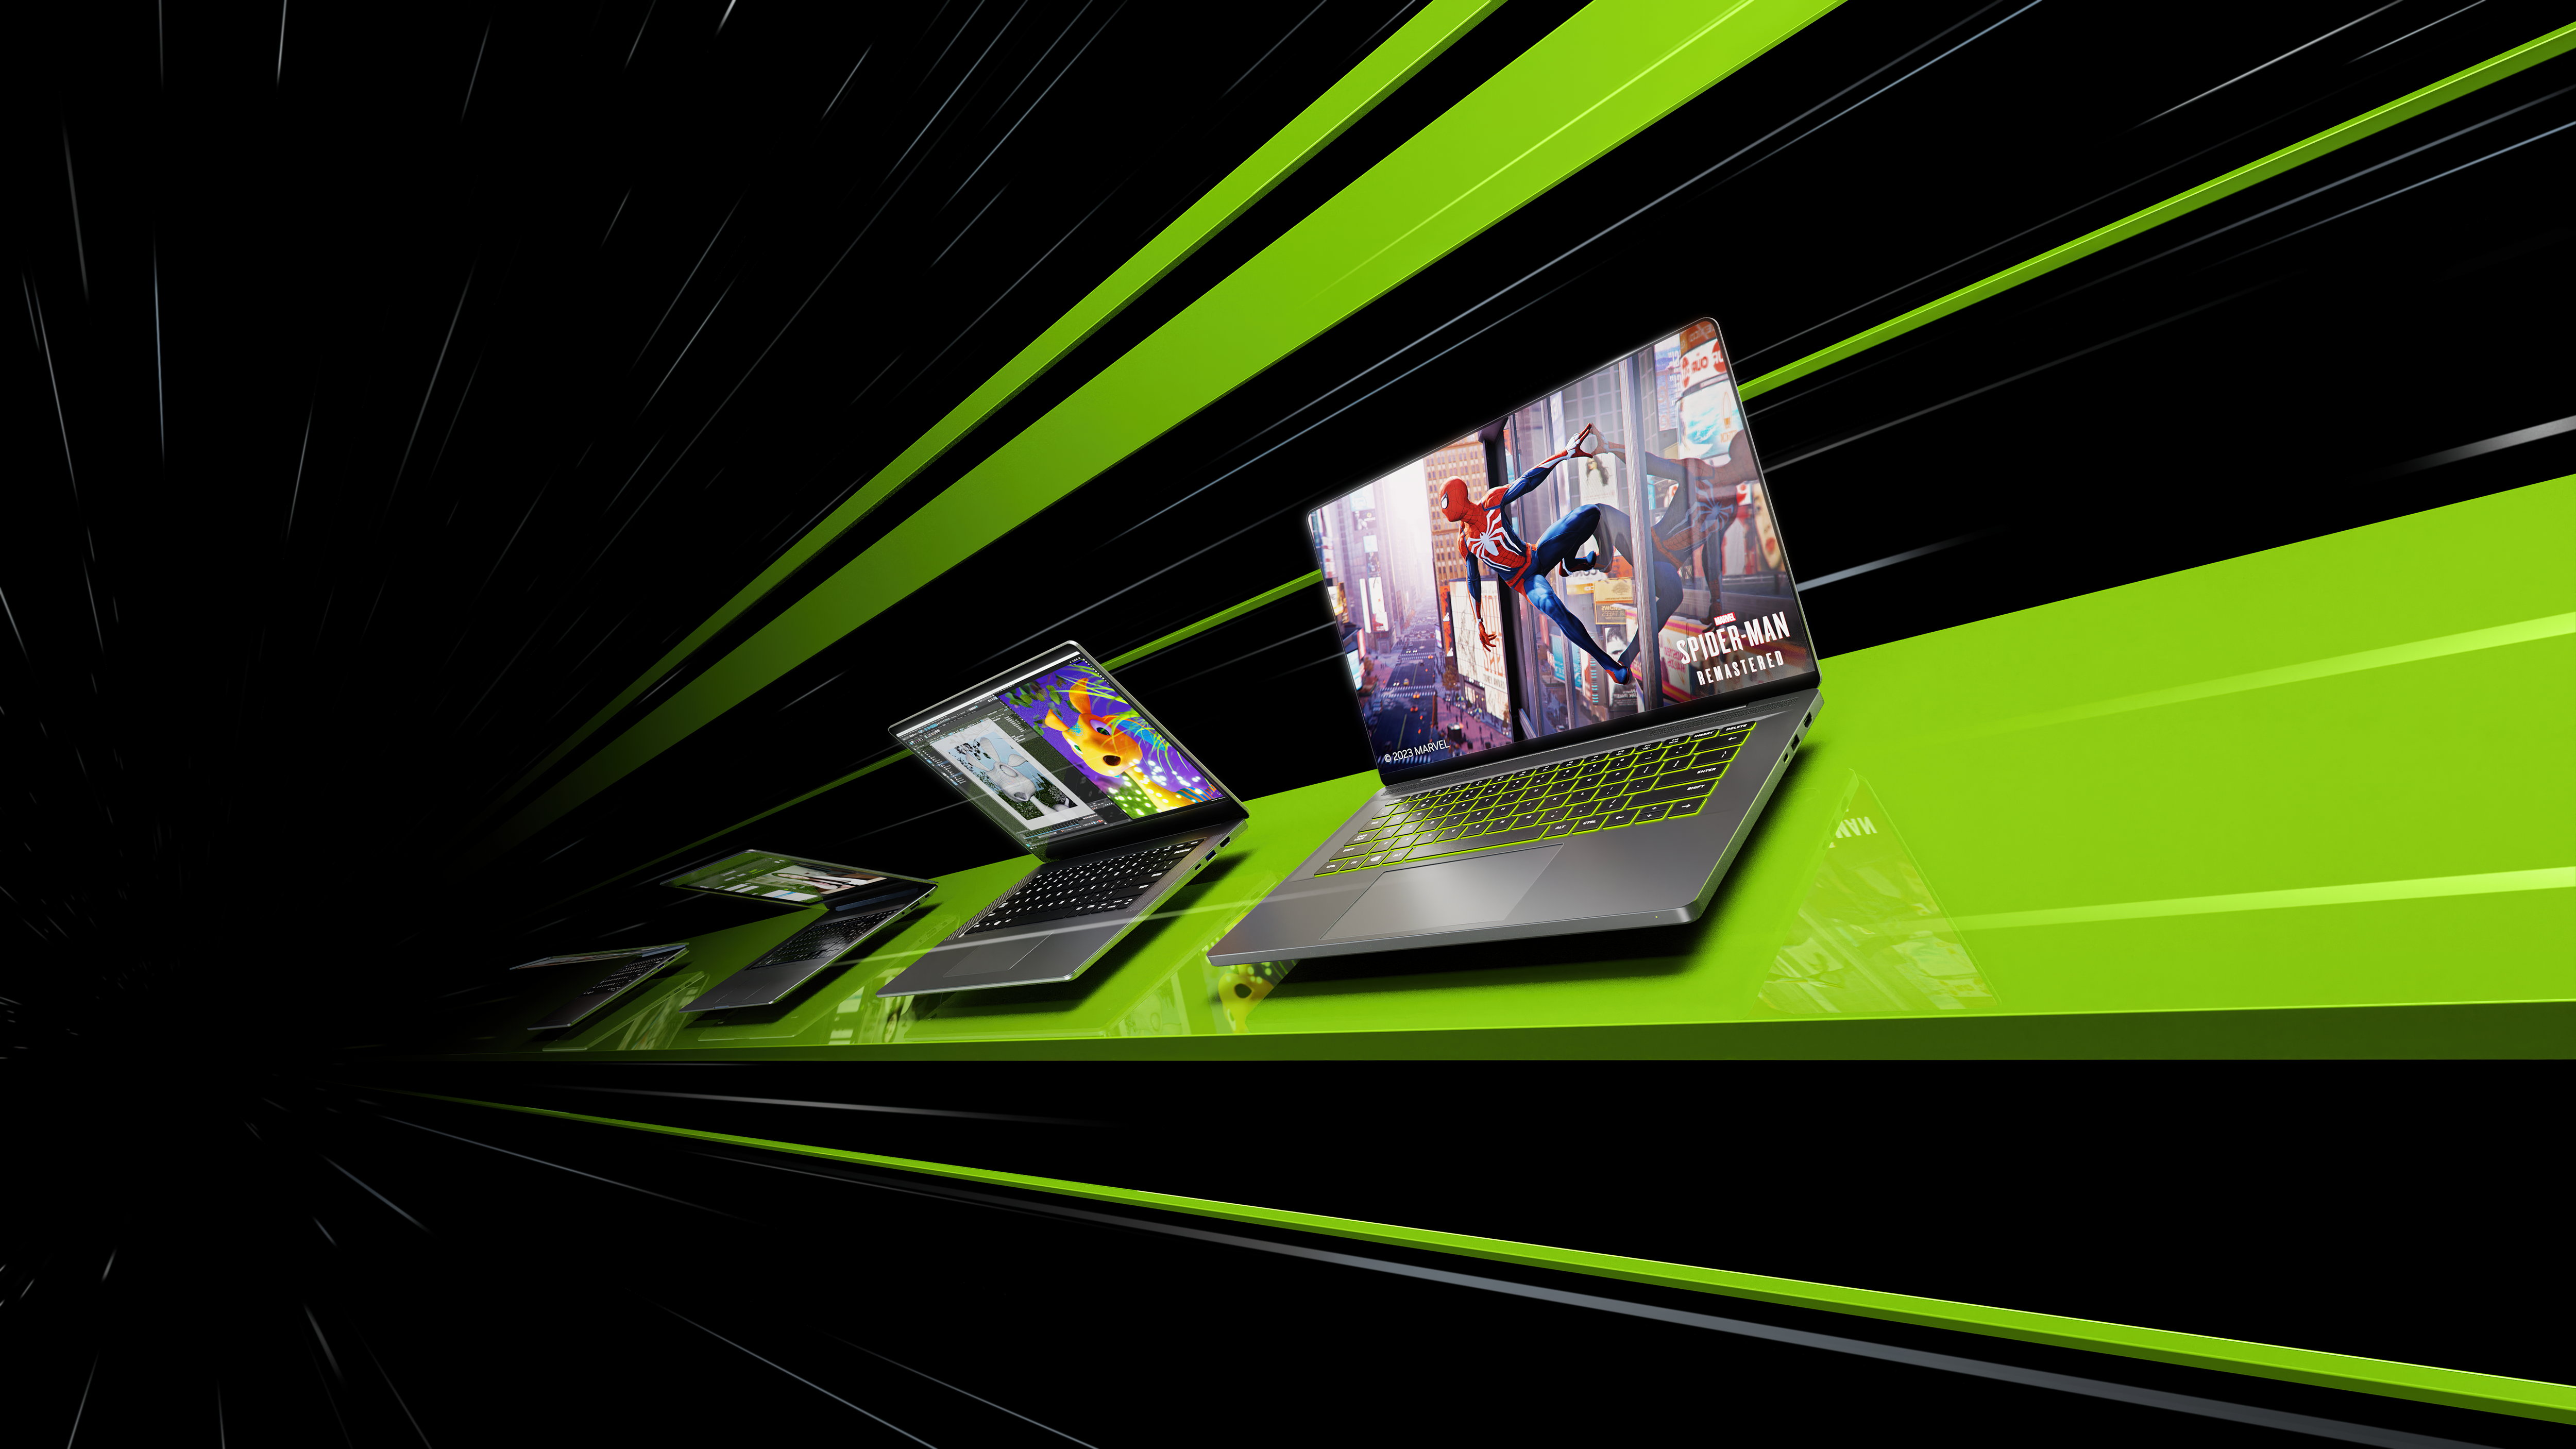 Perspective view of different laptops over a green stripe on a black background